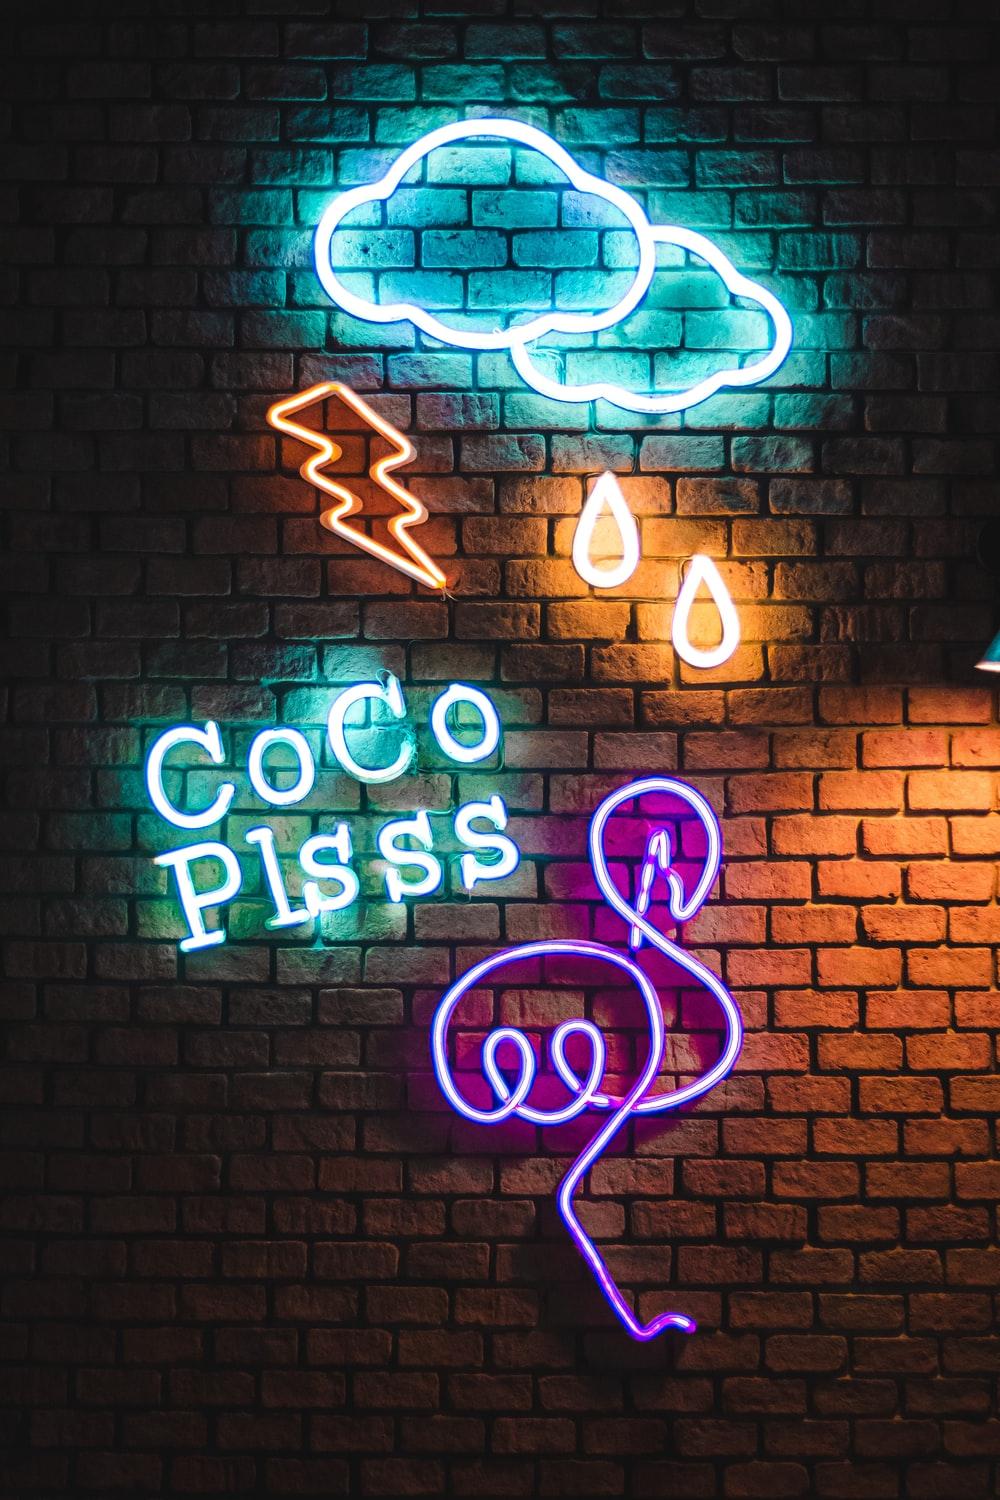 500+ Neon Light Pictures